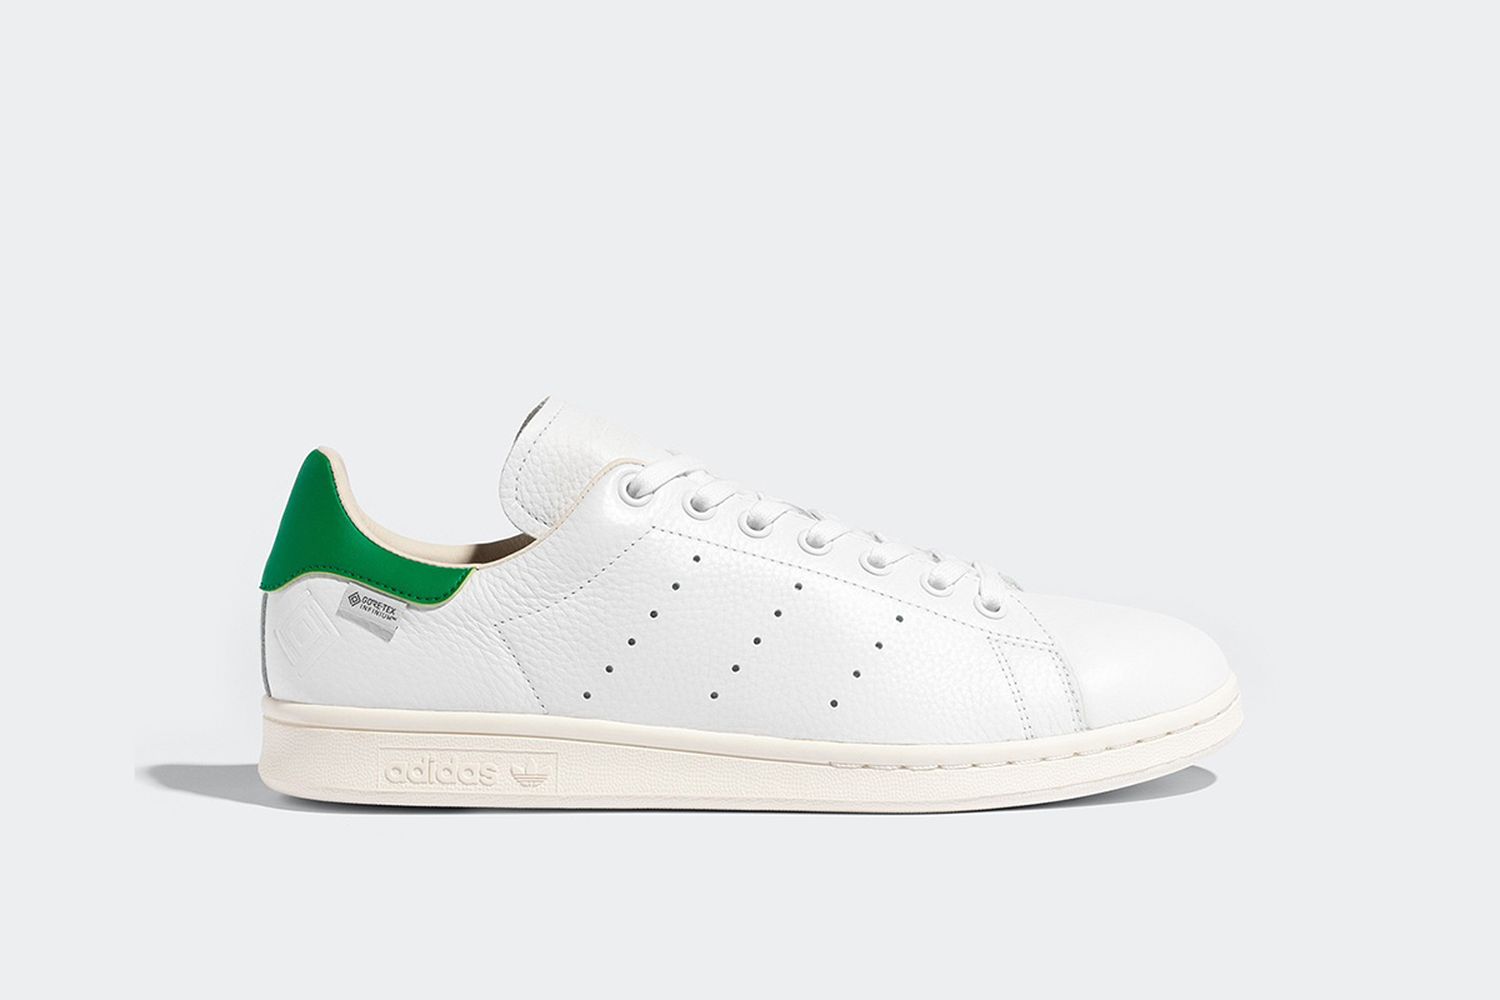 Stan Smith GORE-TEX Shoes